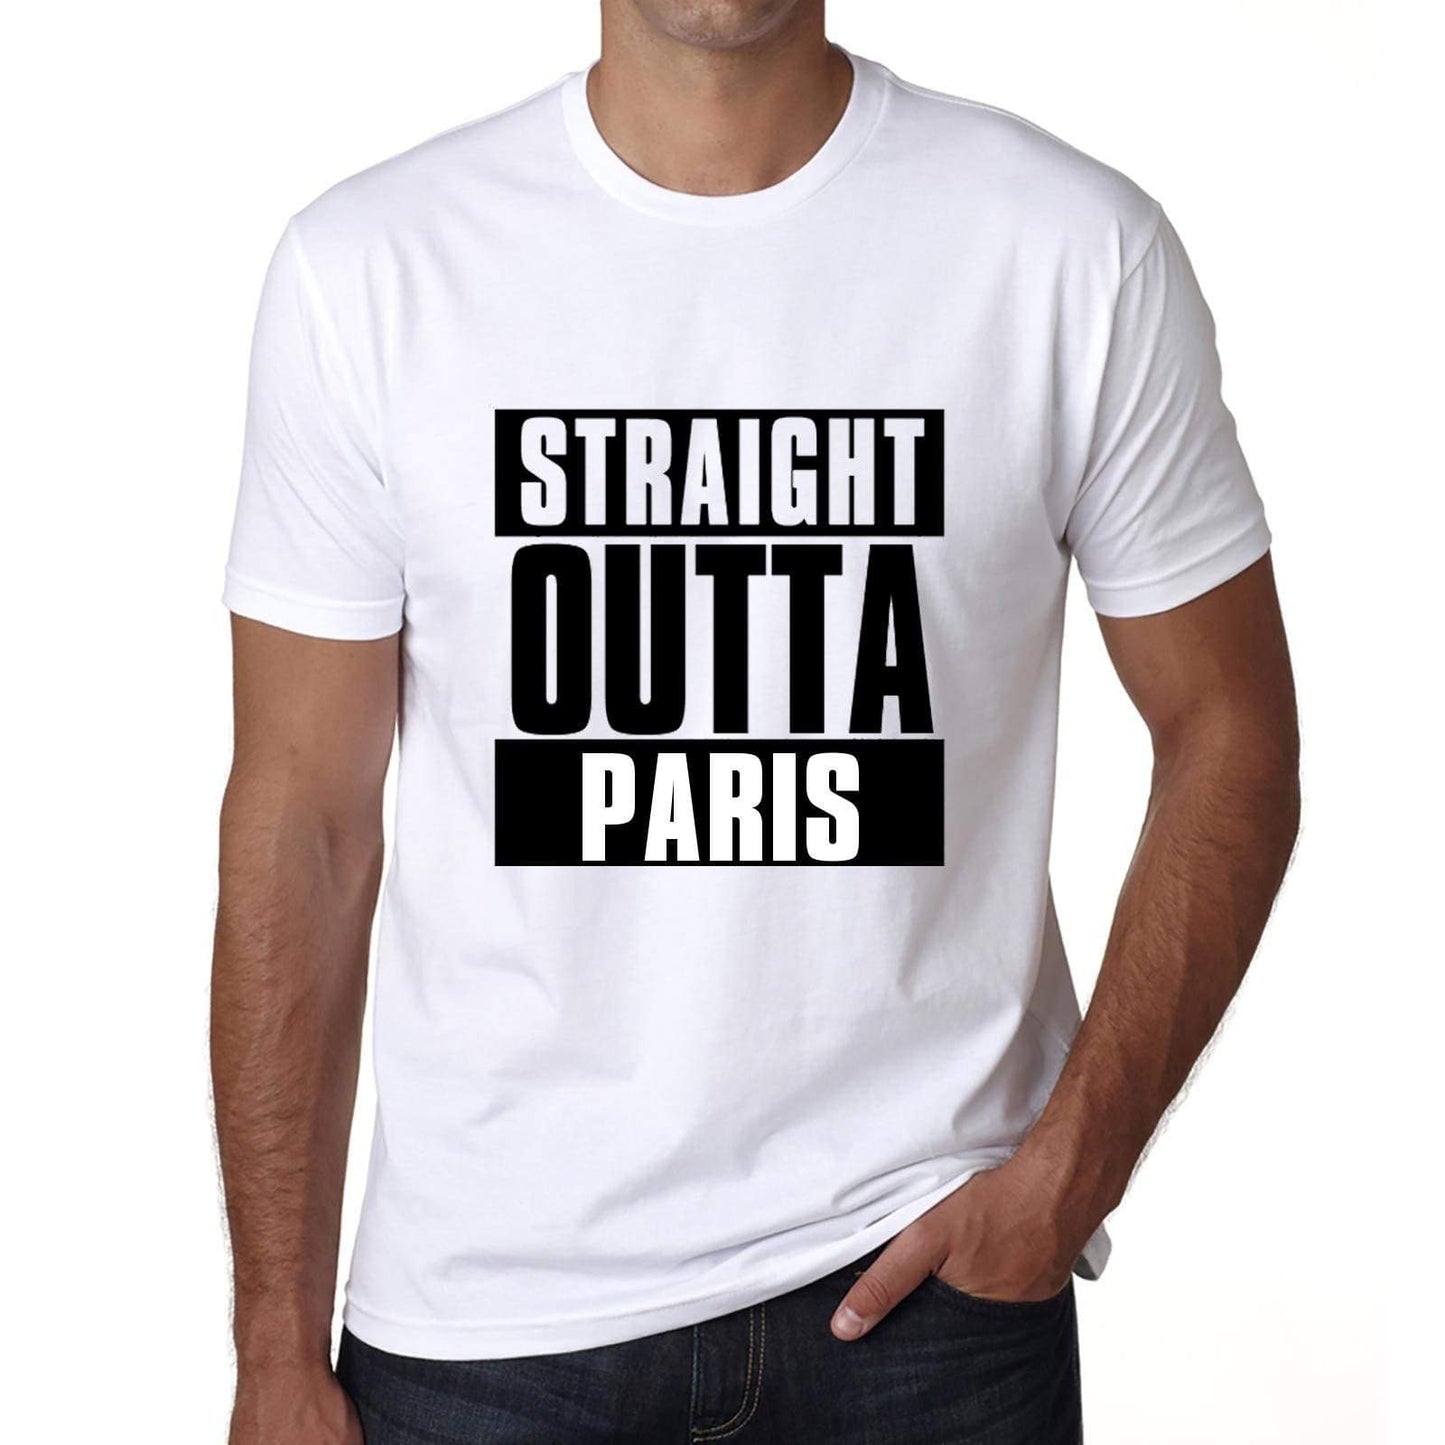 Straight Outta Paris Mens Short Sleeve Round Neck T-Shirt 00027 - White / S - Casual